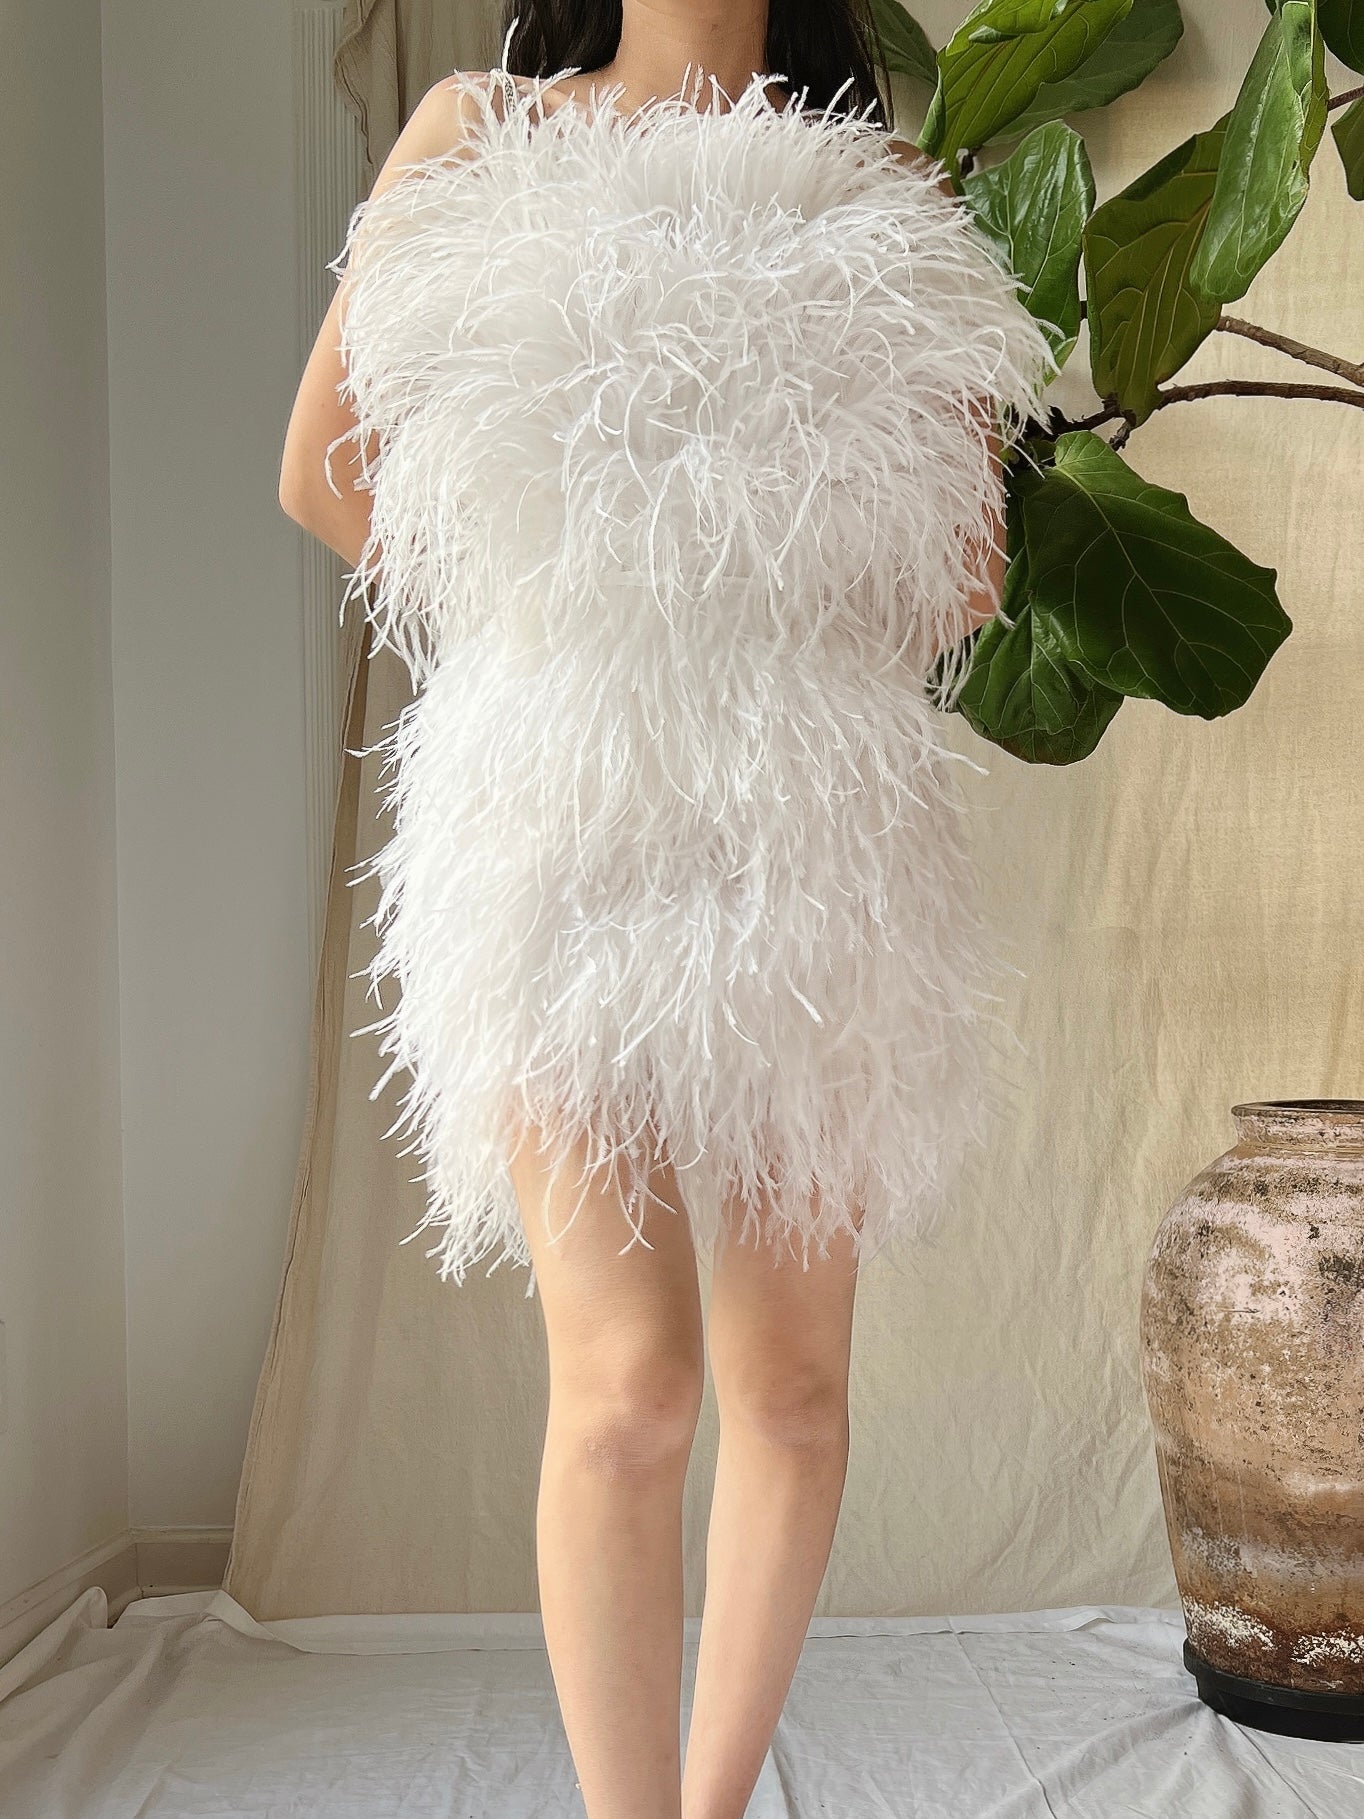 Mable Ostrich Feather Mini Dress M / White